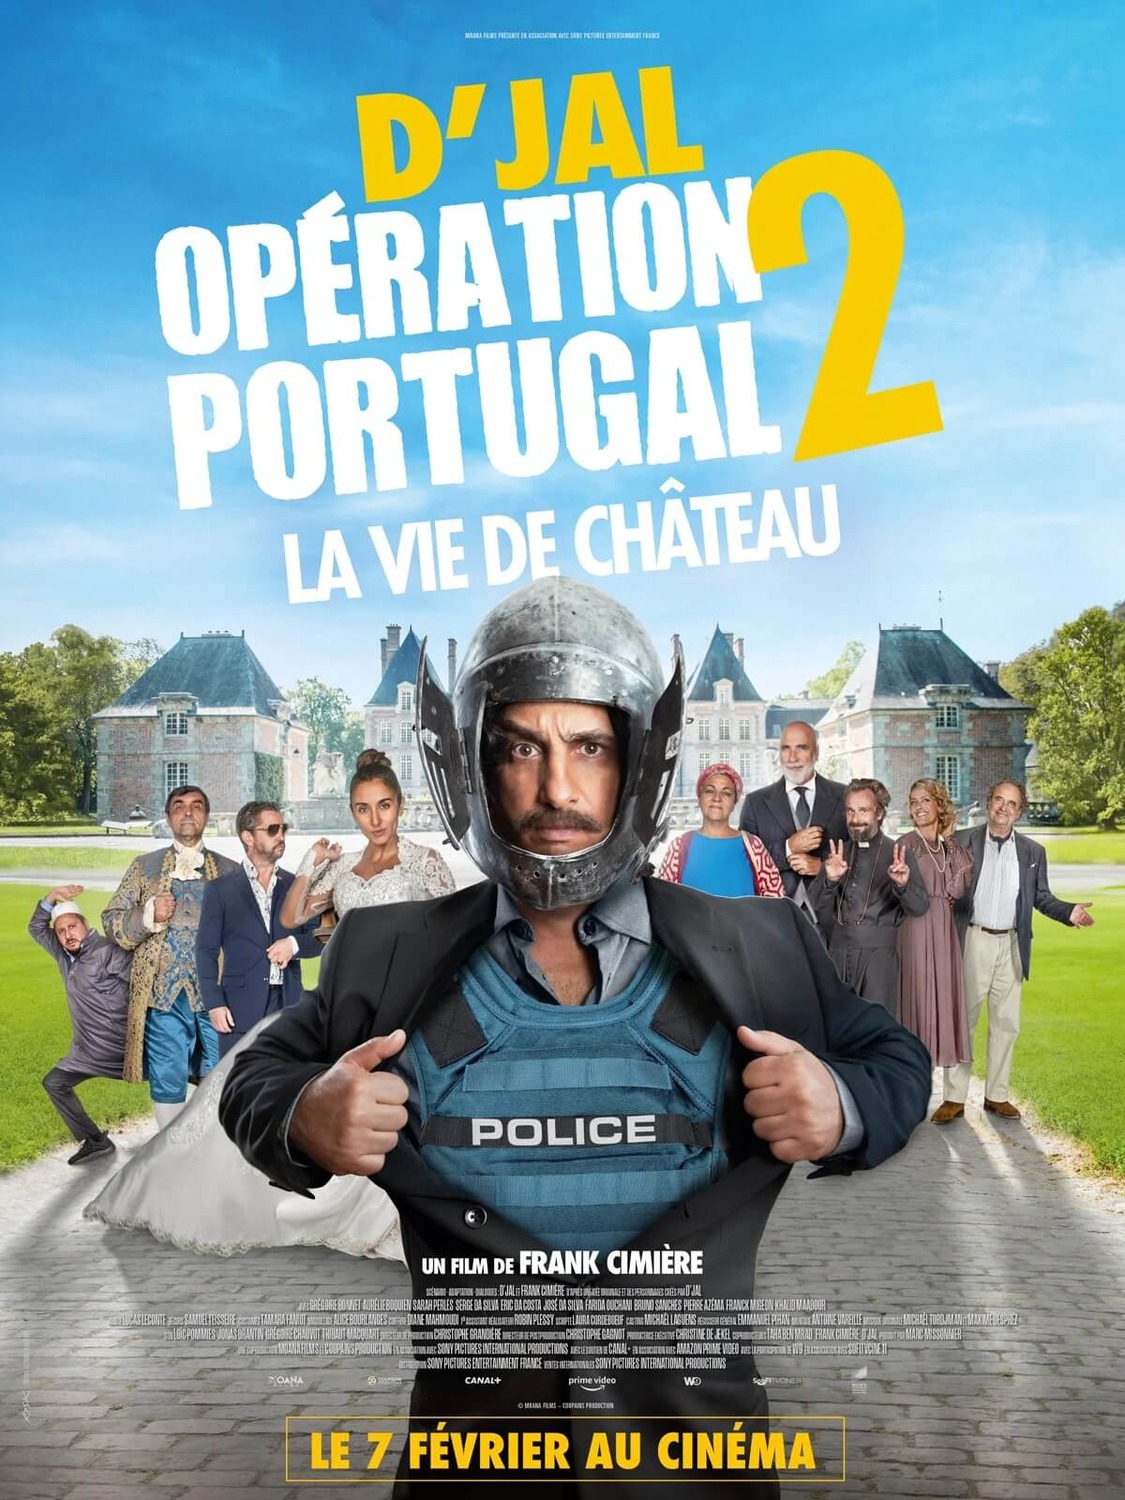 Extra Large Movie Poster Image for Operation Portugal 2 - La vie de chateau (#2 of 2)